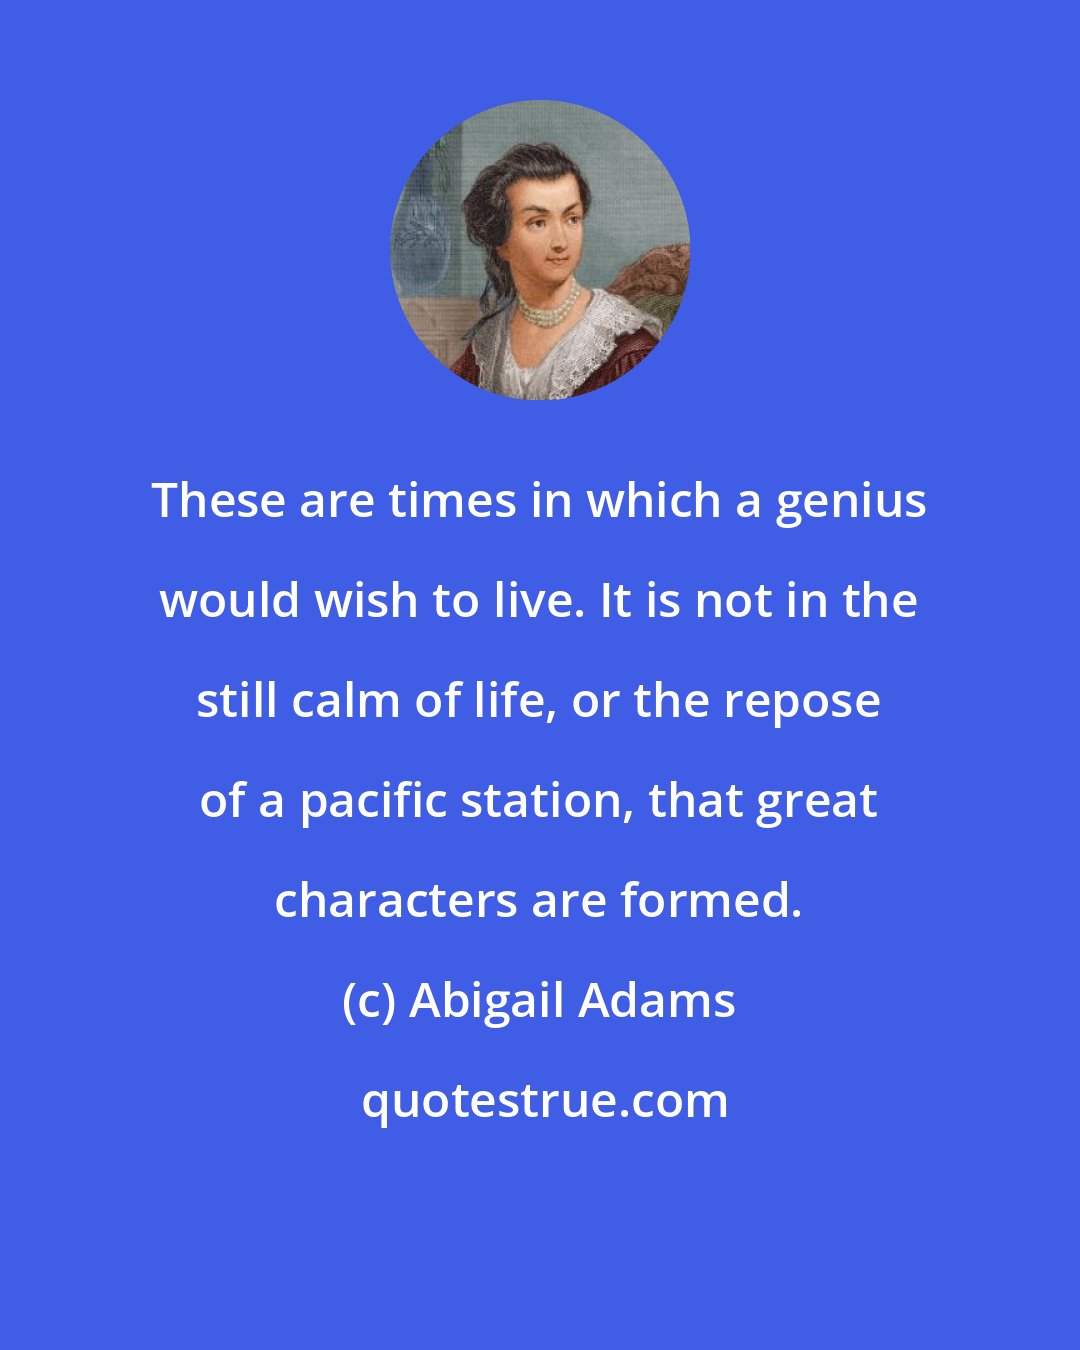 Abigail Adams: These are times in which a genius would wish to live. It is not in the still calm of life, or the repose of a pacific station, that great characters are formed.